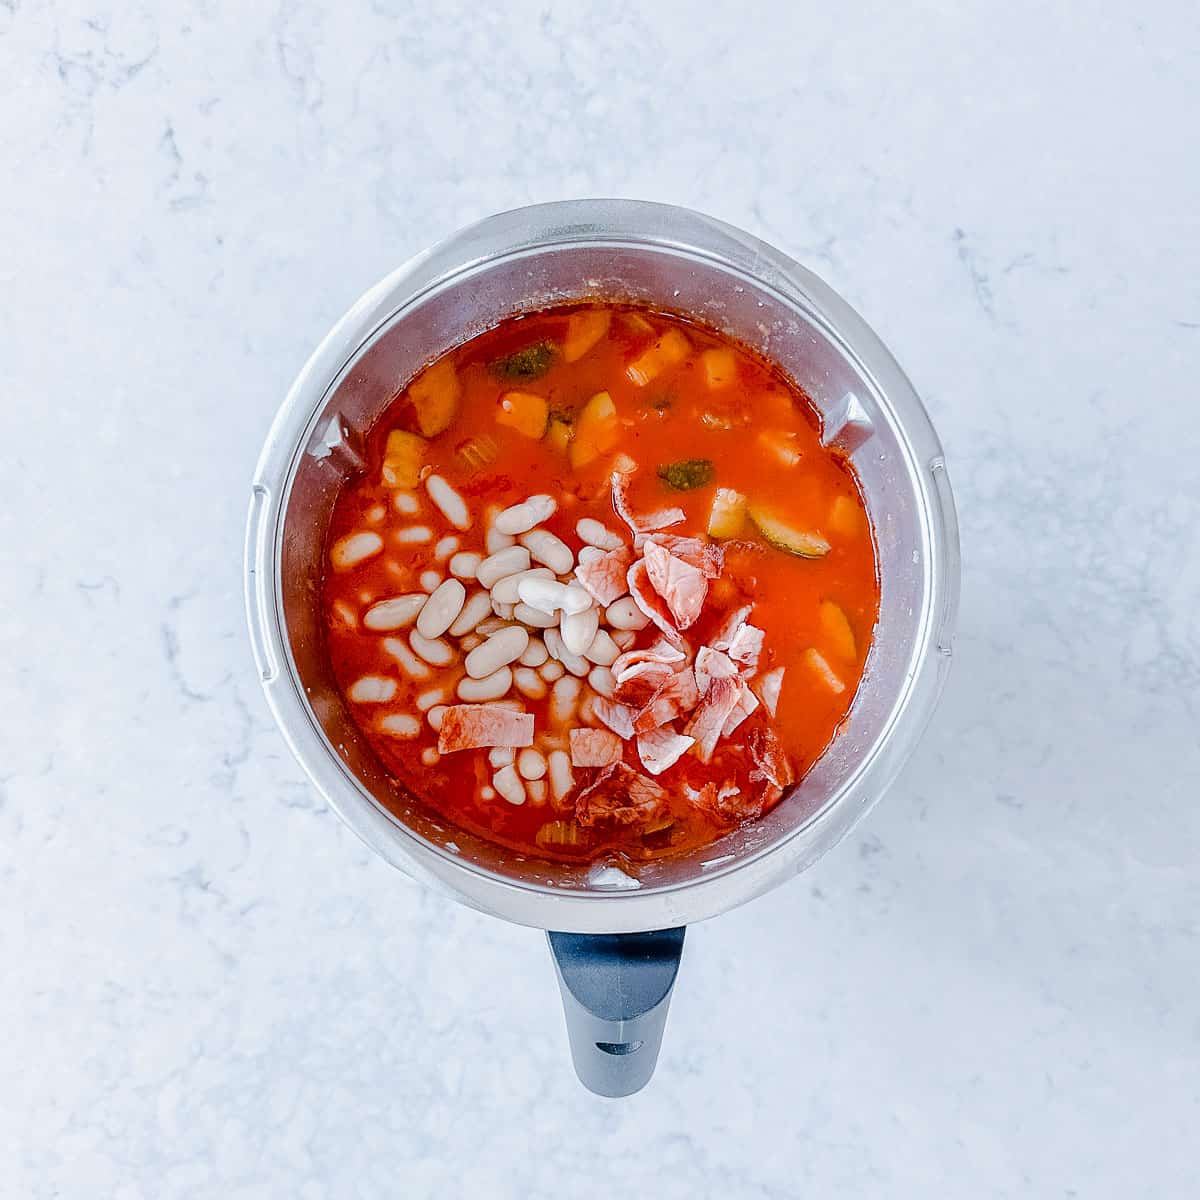 Homemade Minestrone Soup being made in the Thermomix.